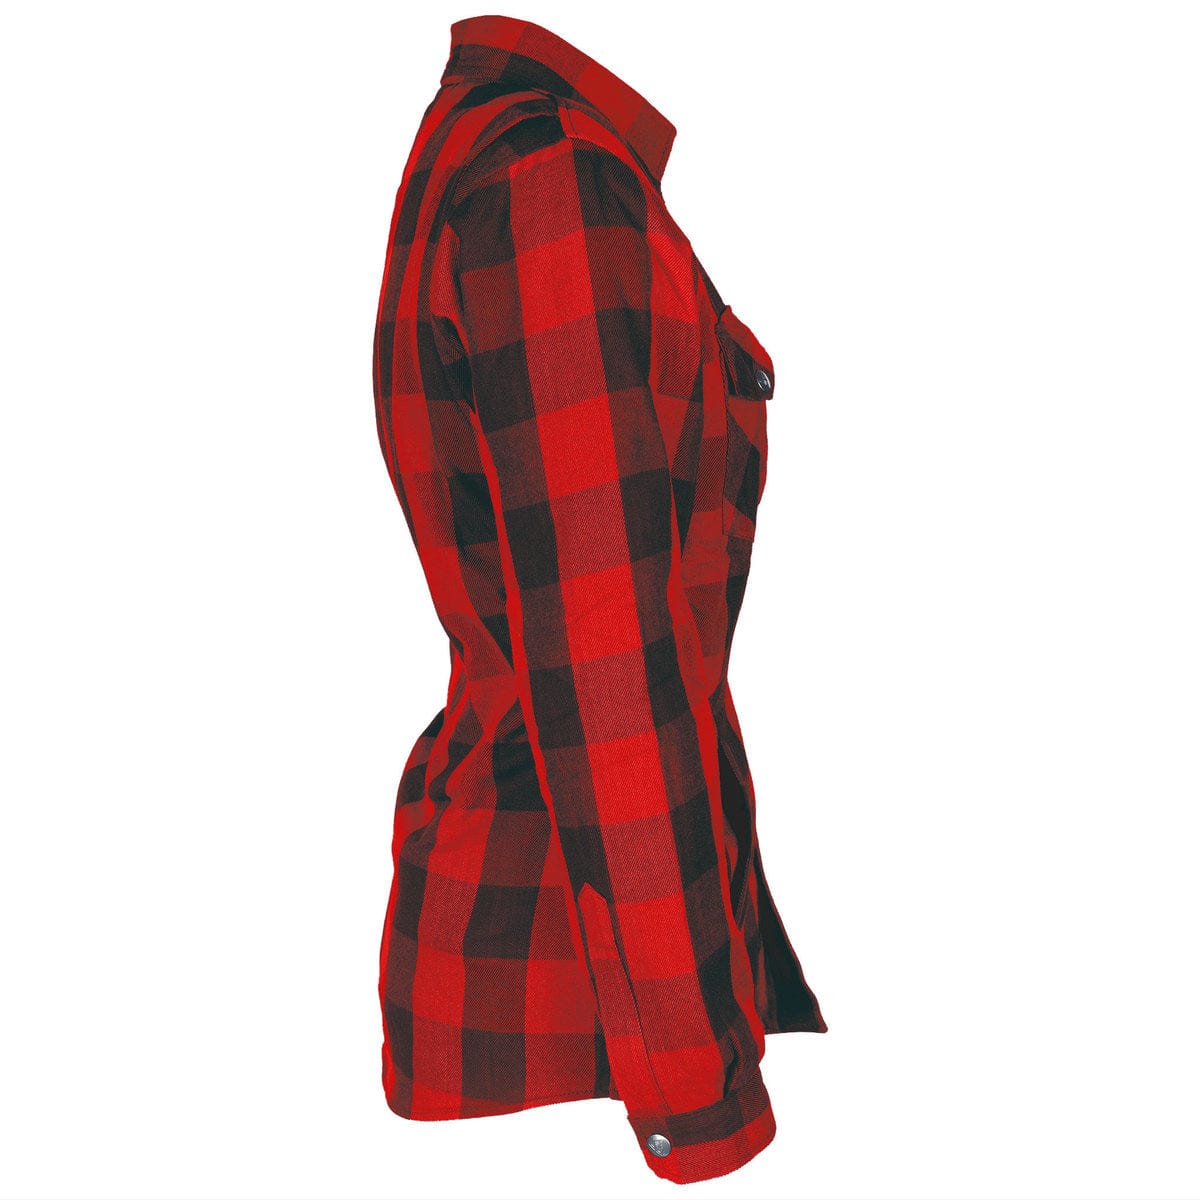 Protective Flannel Shirt for Women - Red Checkered